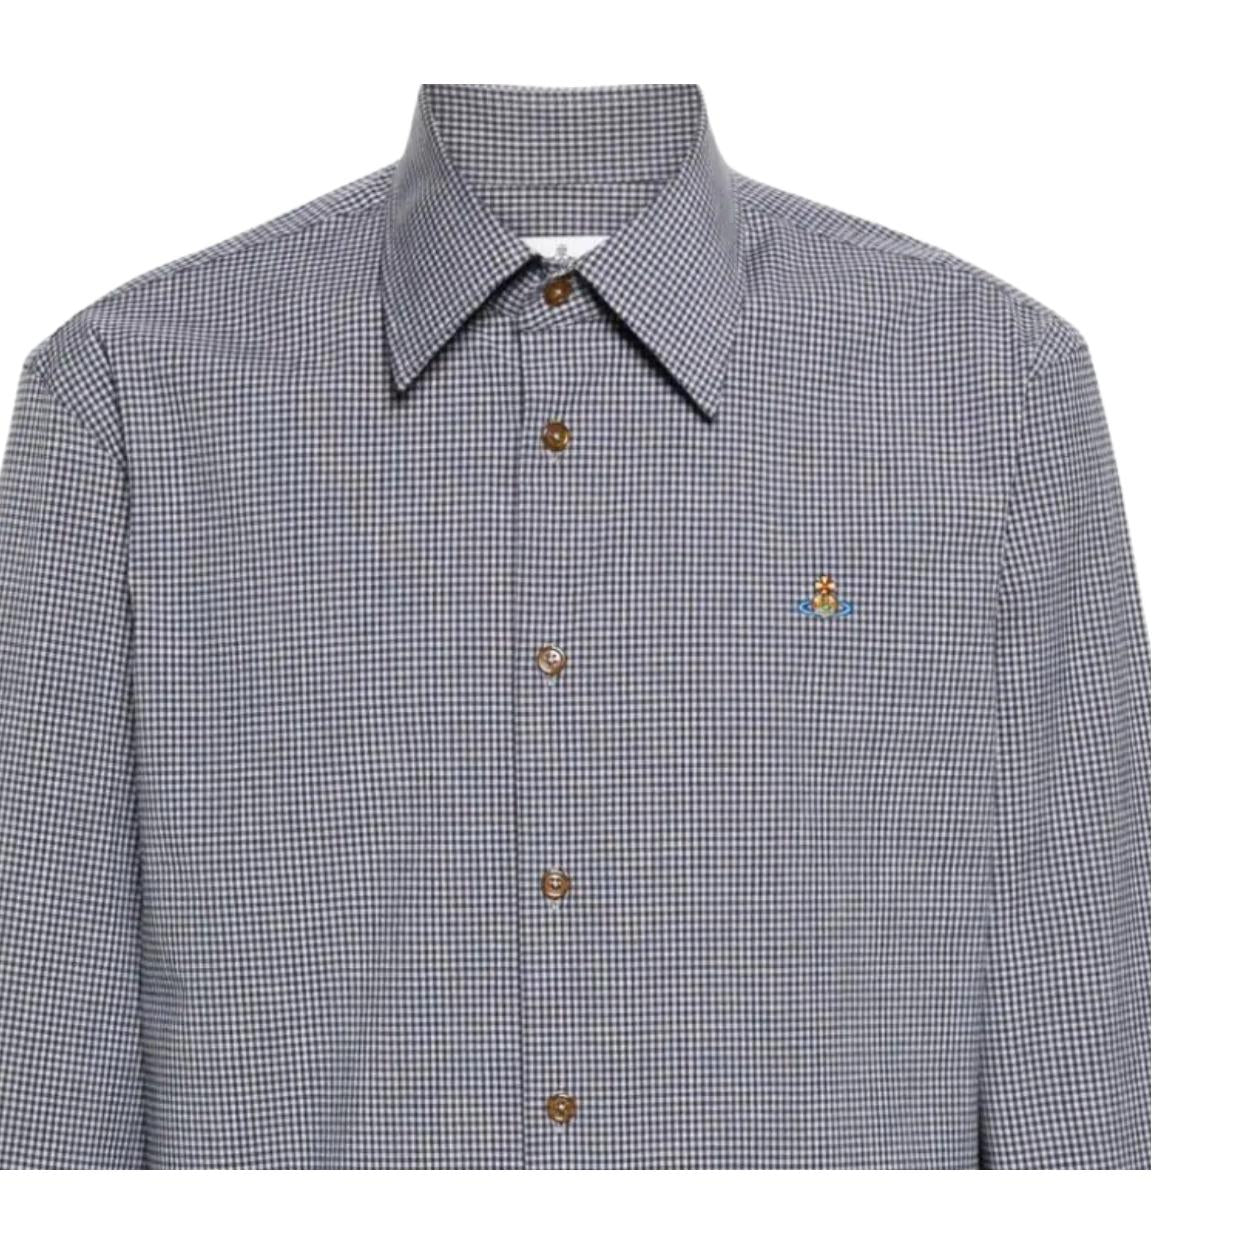 Vivienne Westwood Gingham Check Ghost Shirt